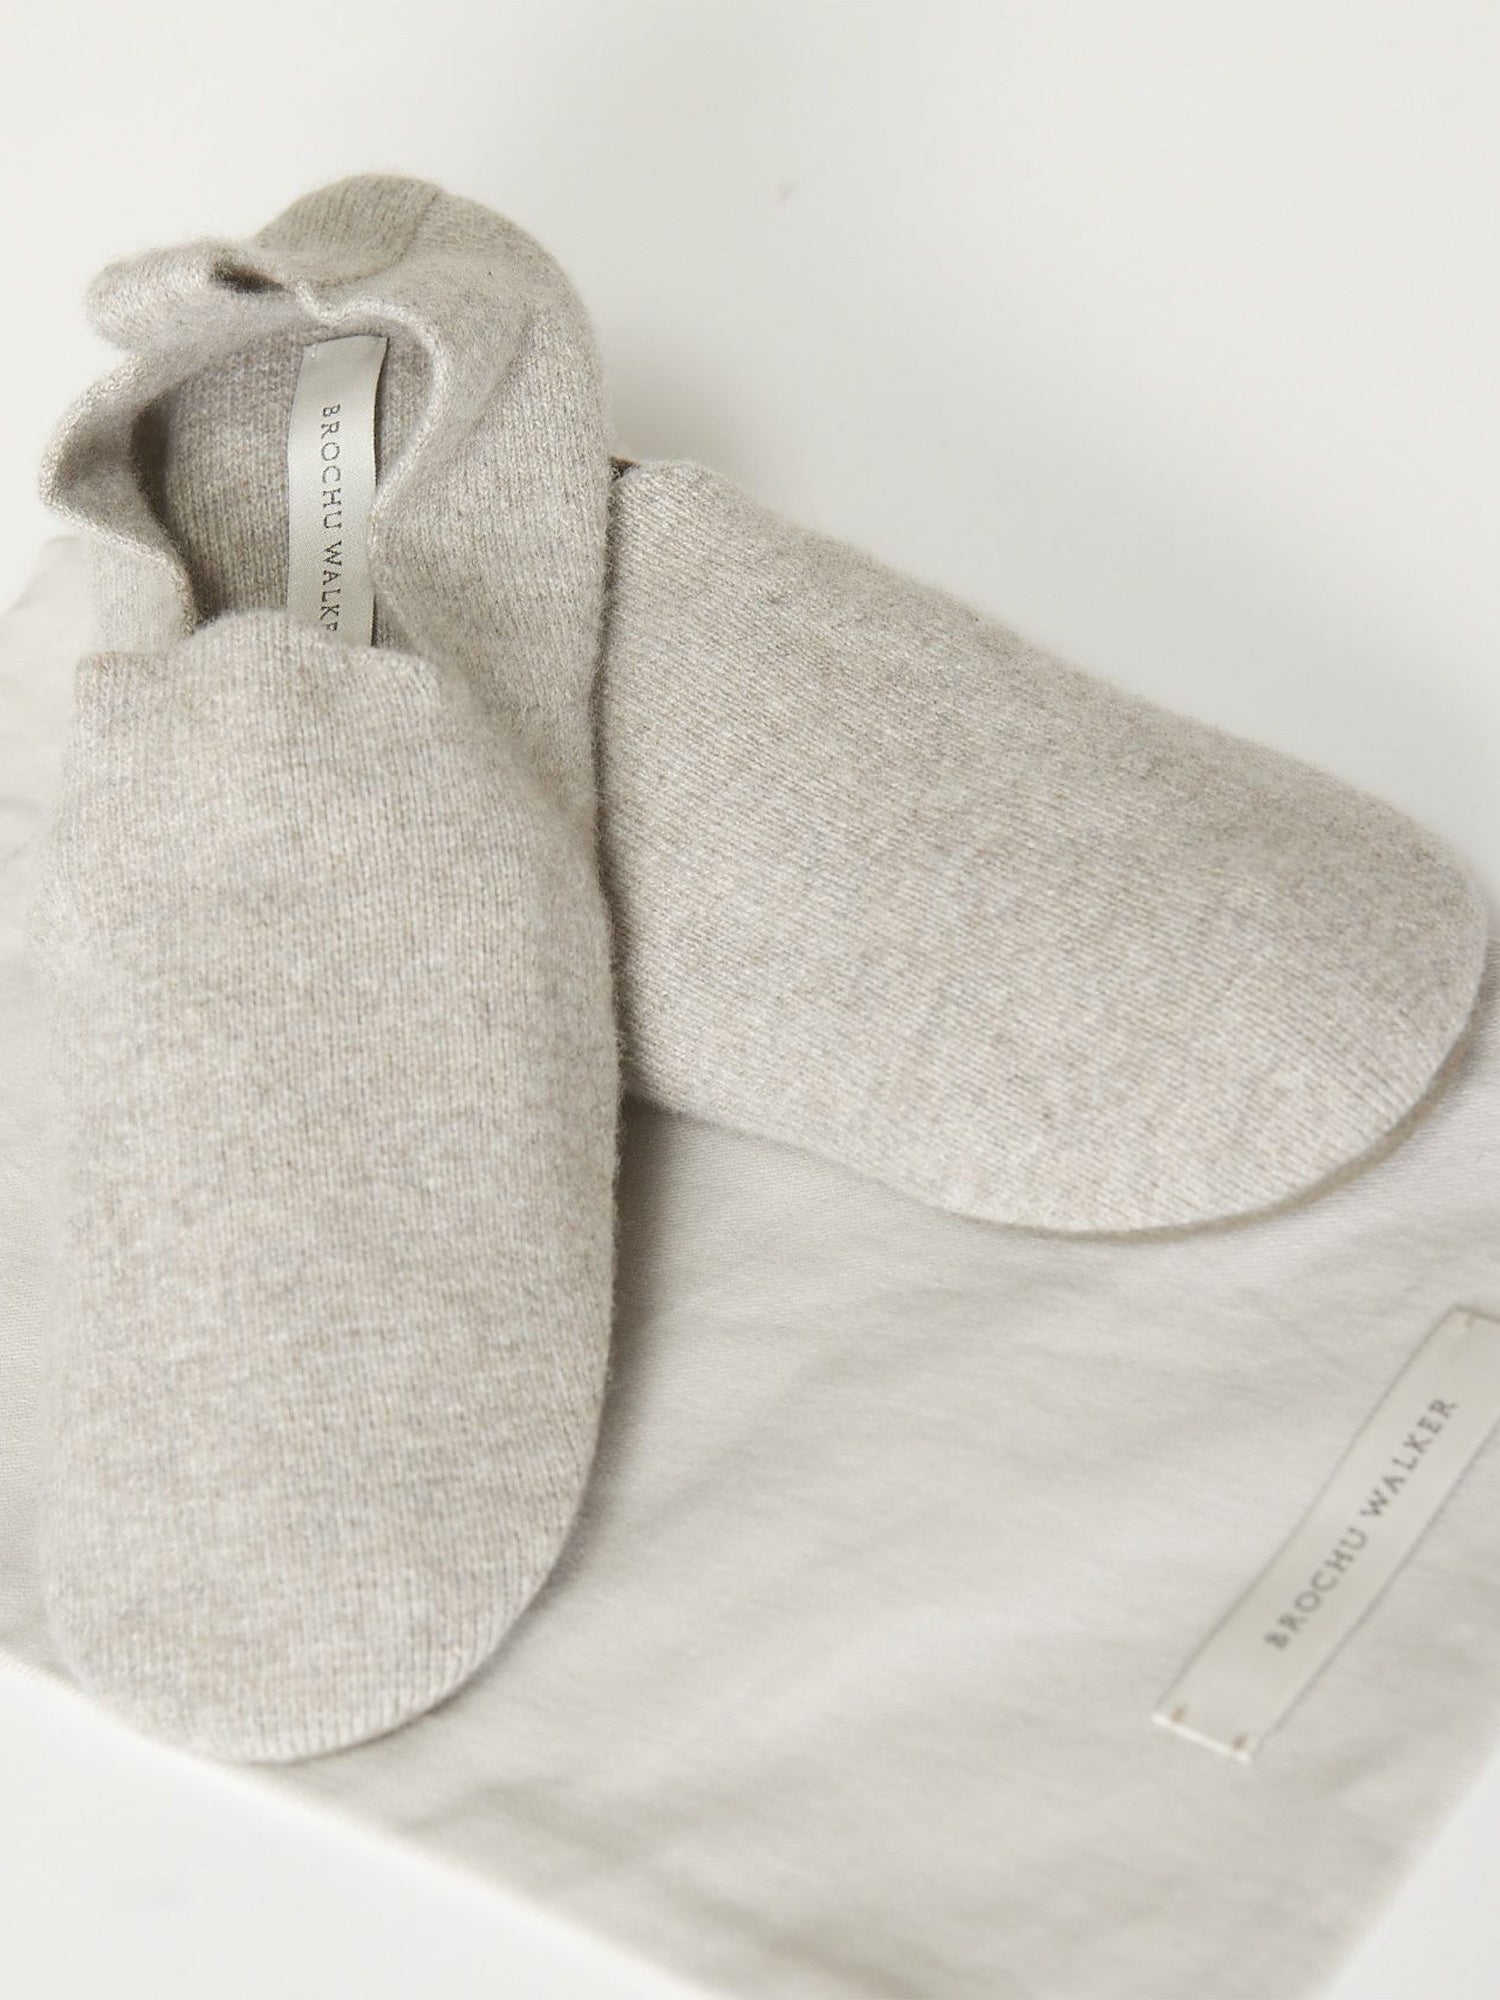 Cashmere grey slipper socks front view